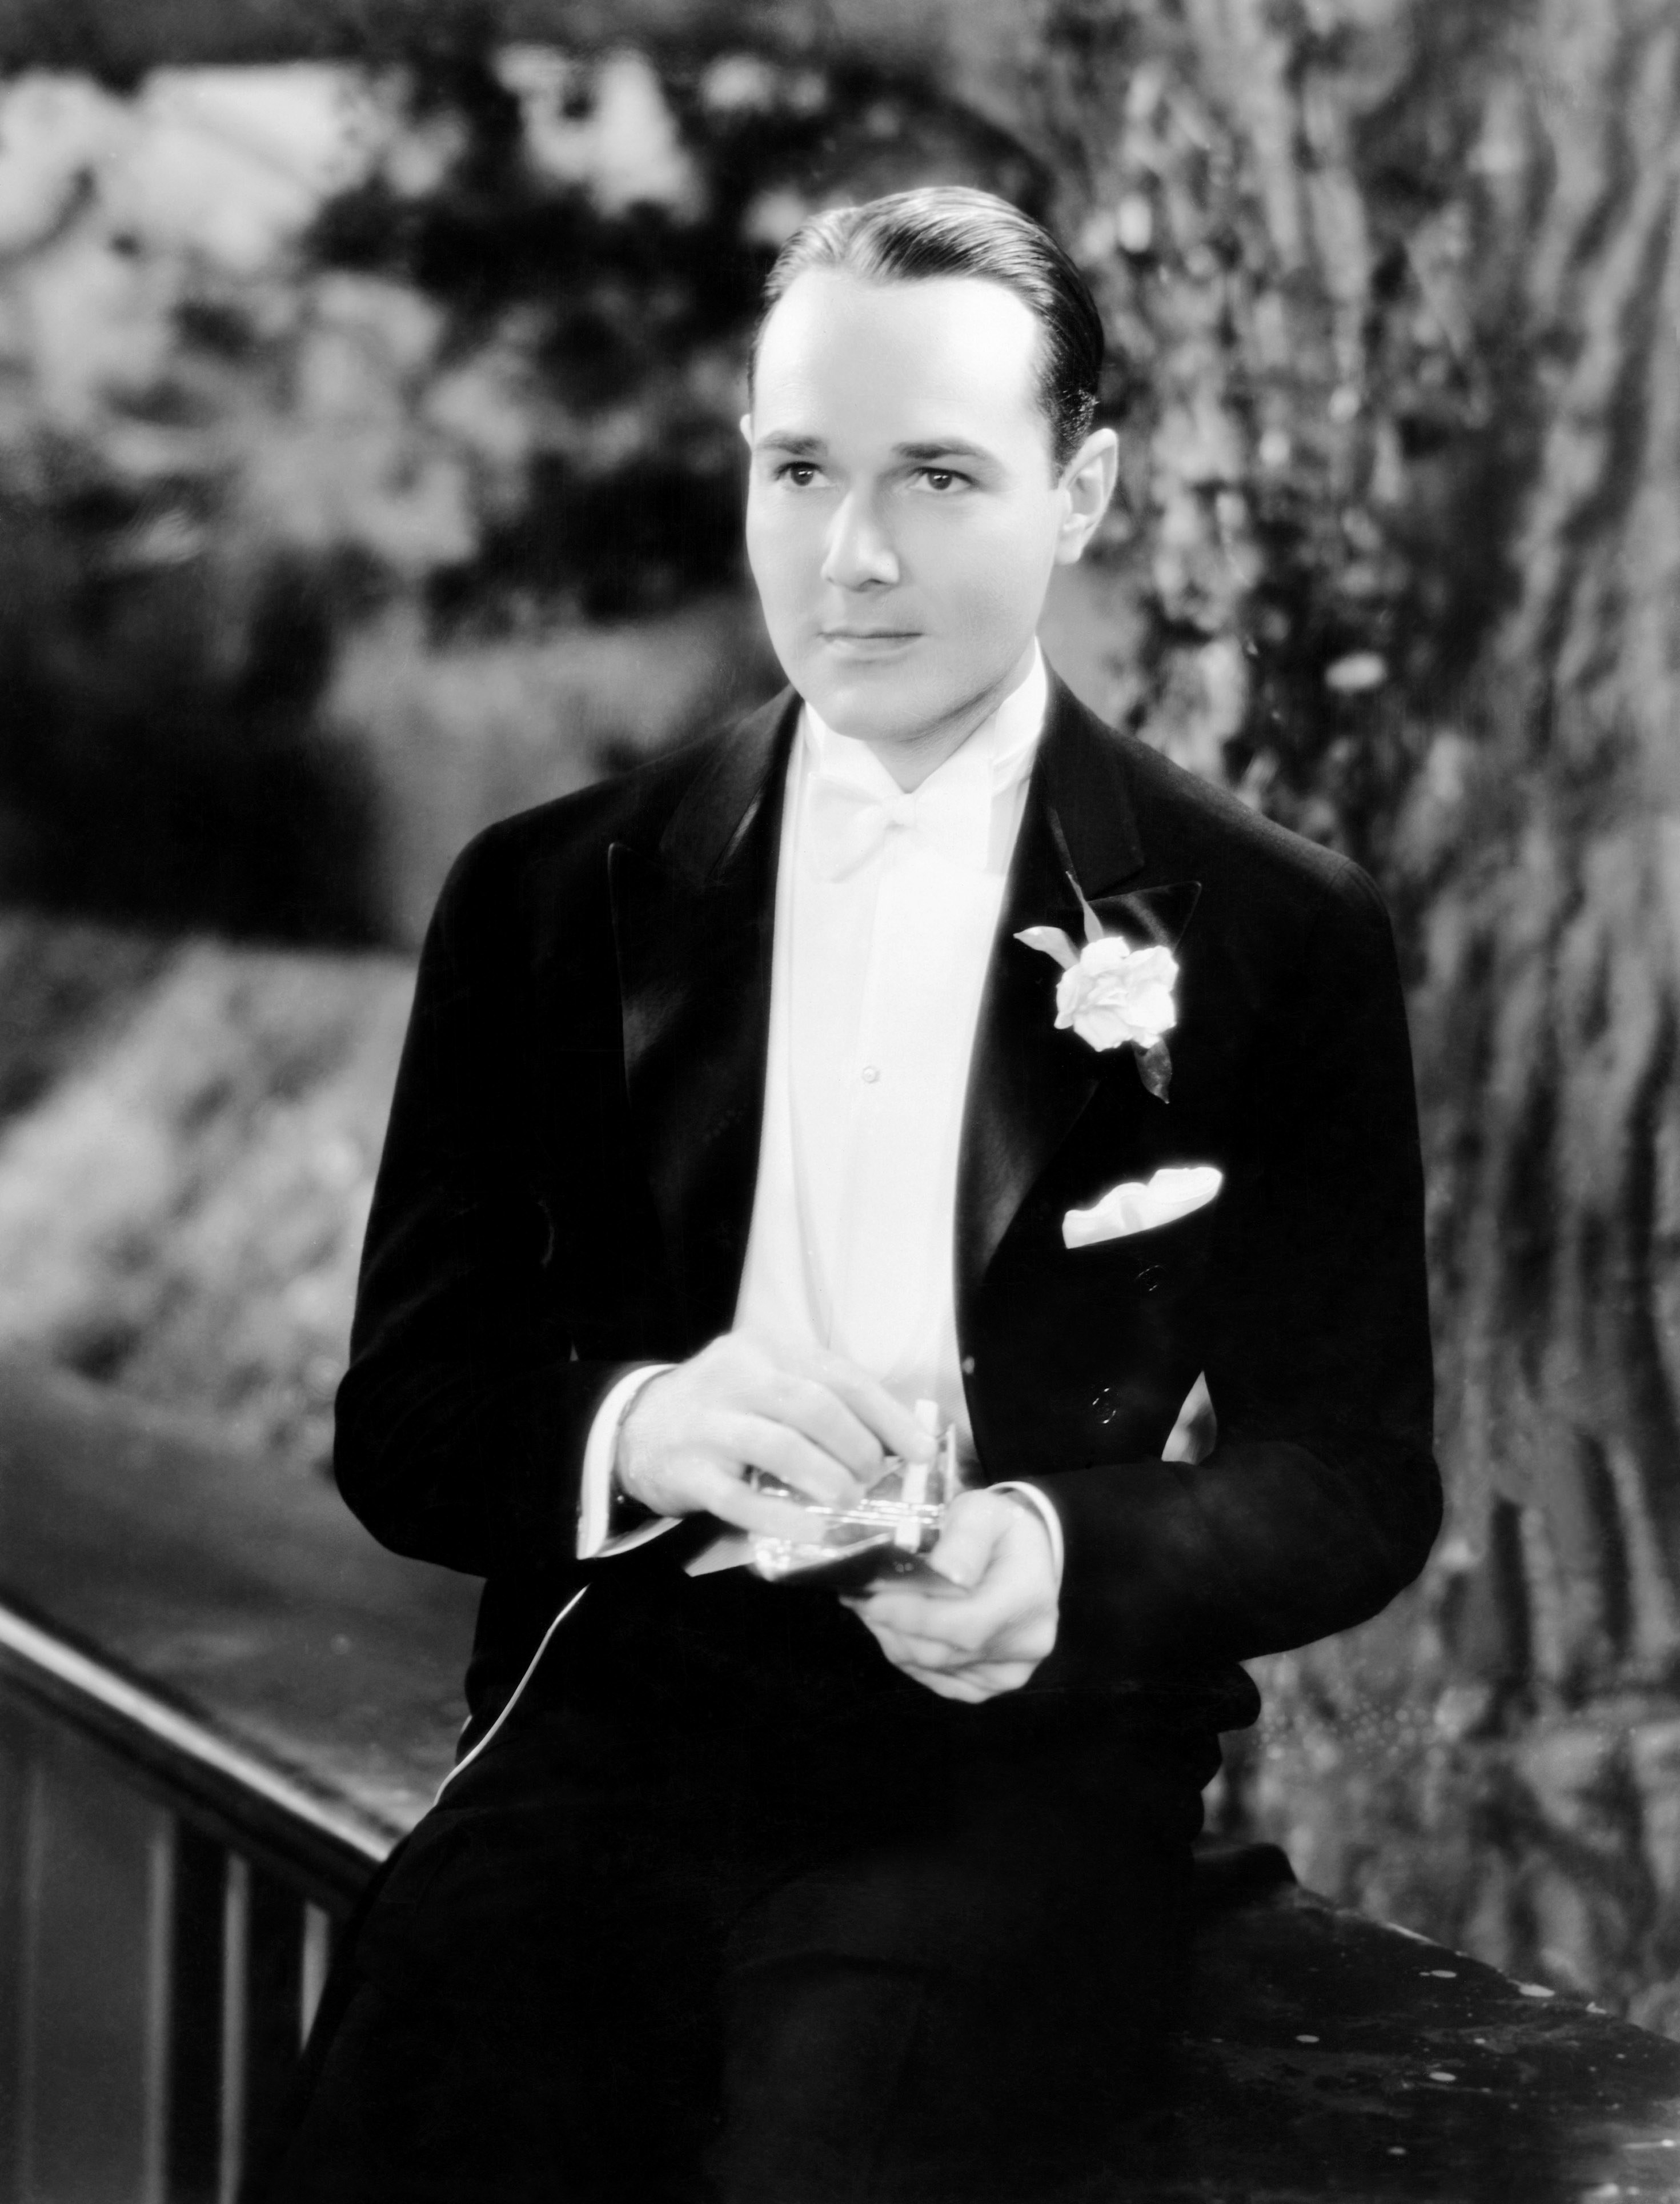 Billy Haines in a tuxedo